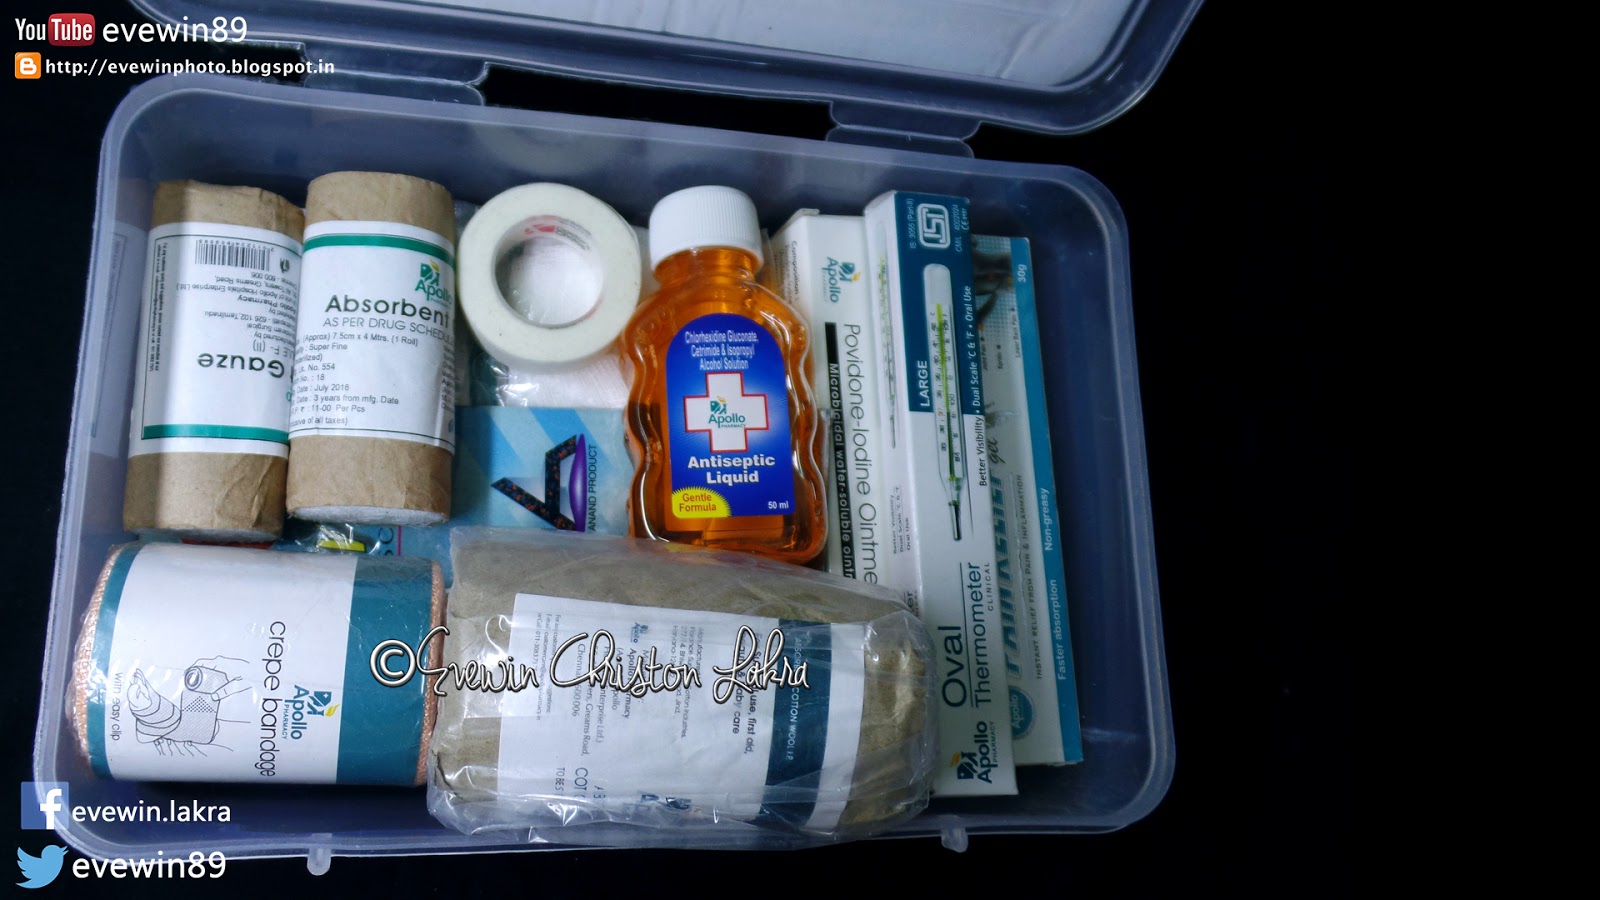 Evewin Photo: Apollo Pharmacy First Aid Kit Review By ...